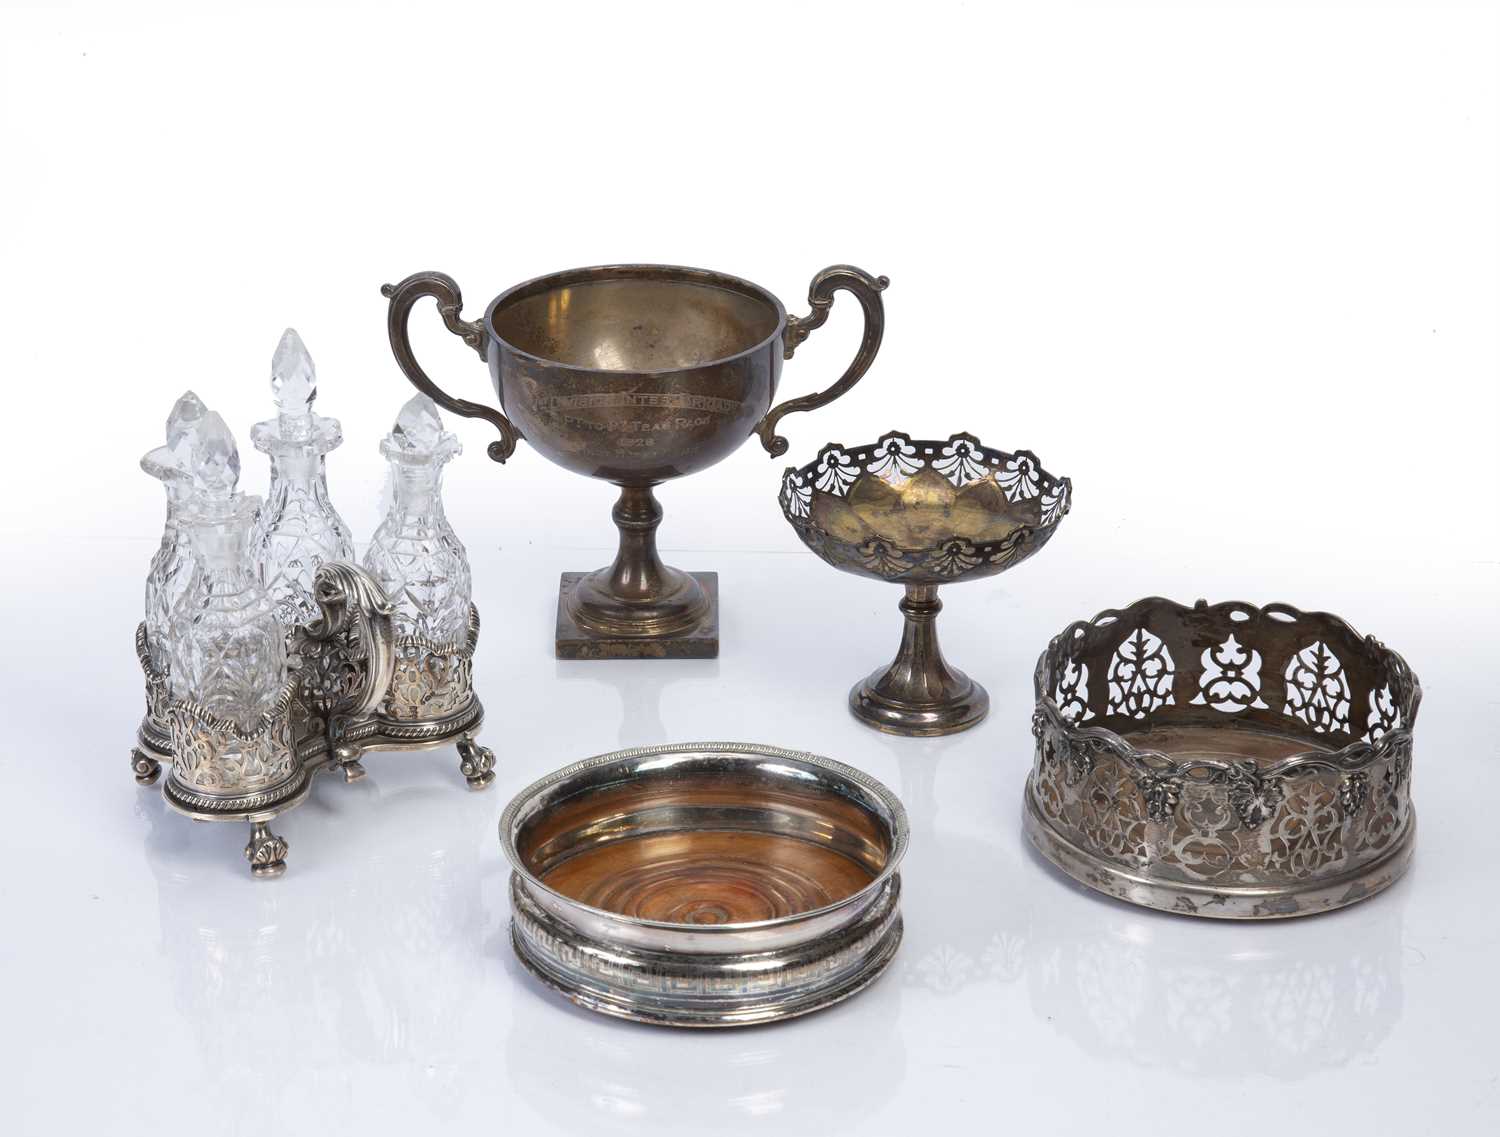 Collection of silver and silver-plated items to include: Three-piece glass cruet set on silver